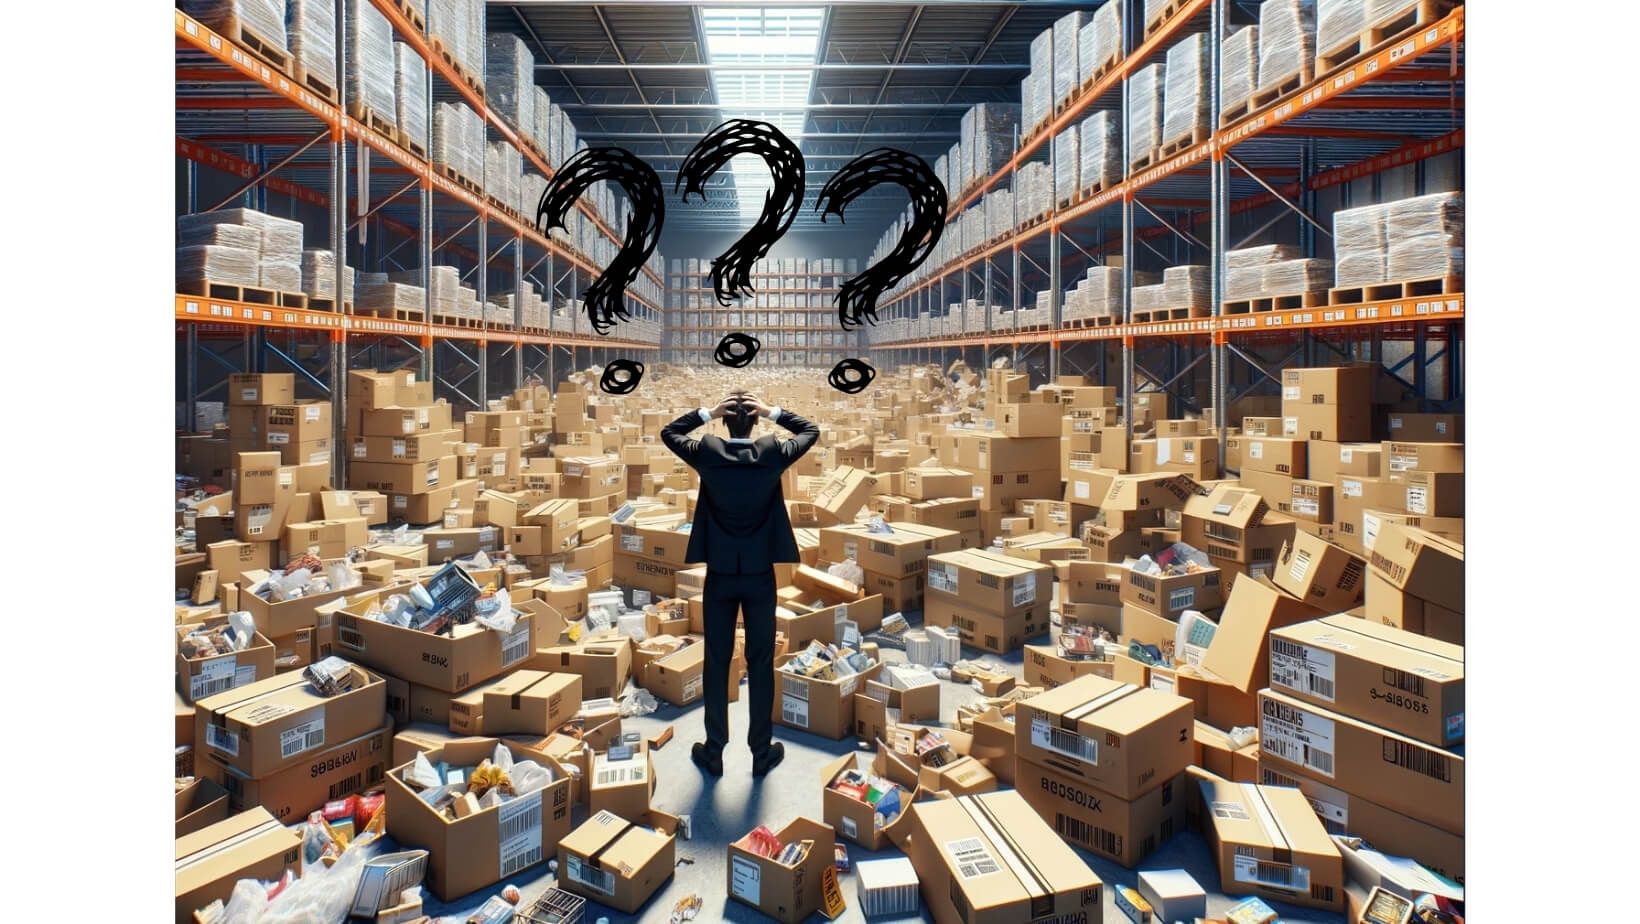 Overwhelmed manager in a disorganized retail warehouse with empty shelves and lost amidst the inventory, with clear signs of inventory discrepancies.